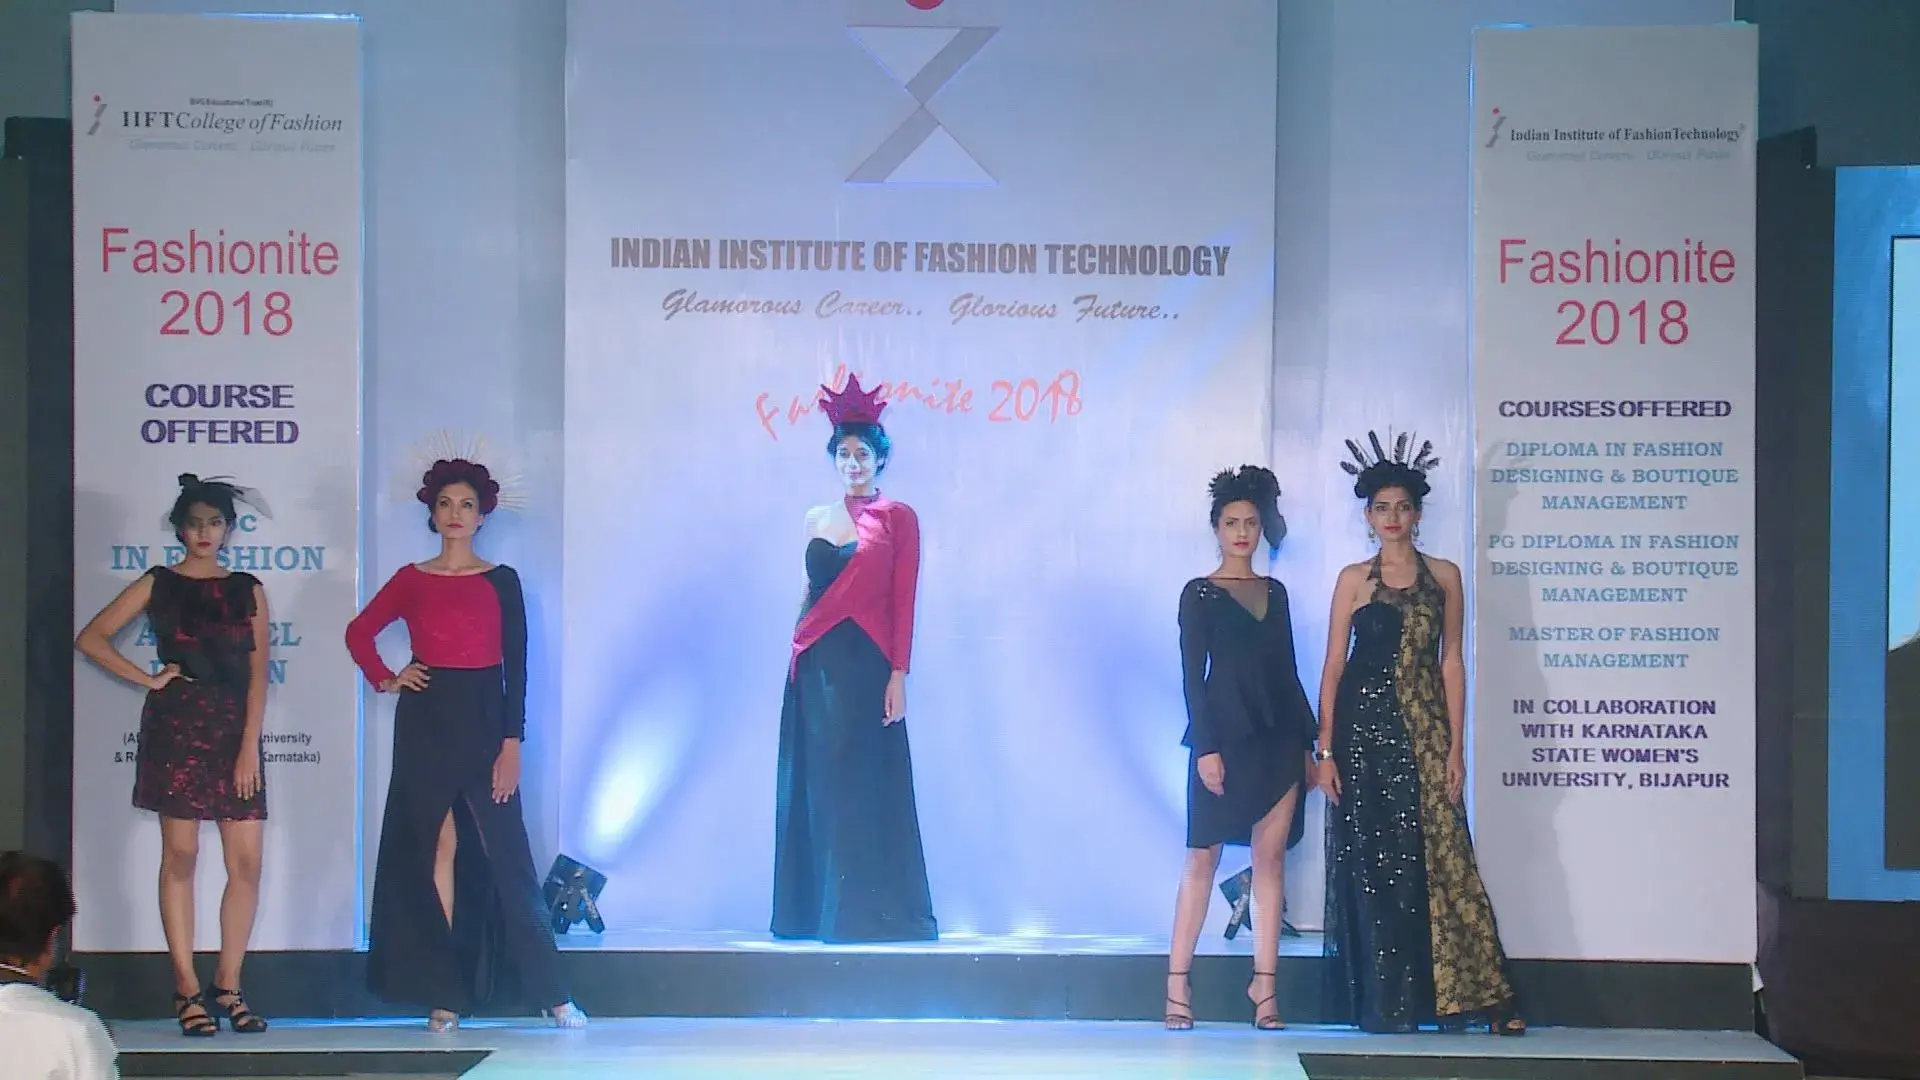 Image from Fashionite 2018 2